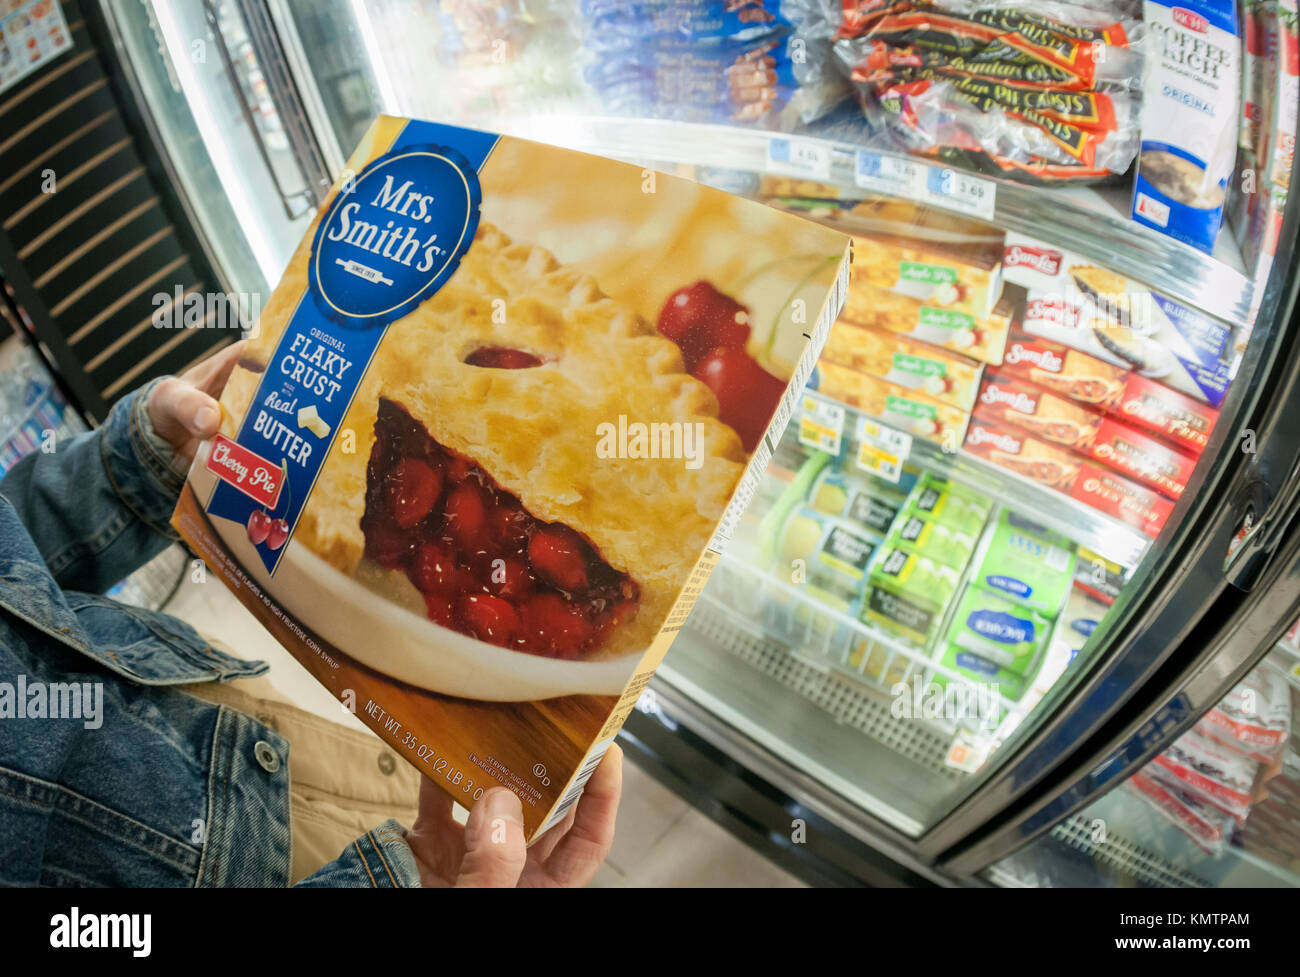 A shopper holds a box of Schwan's Co. Mrs. Smith's frozen pie is seen in a supermarket in New York on Friday, December 1, 2017. The privately owned frozen food maker Schwan's Co. is reported to be considering a sale of the company.  (© Richard B. Levine) Stock Photo